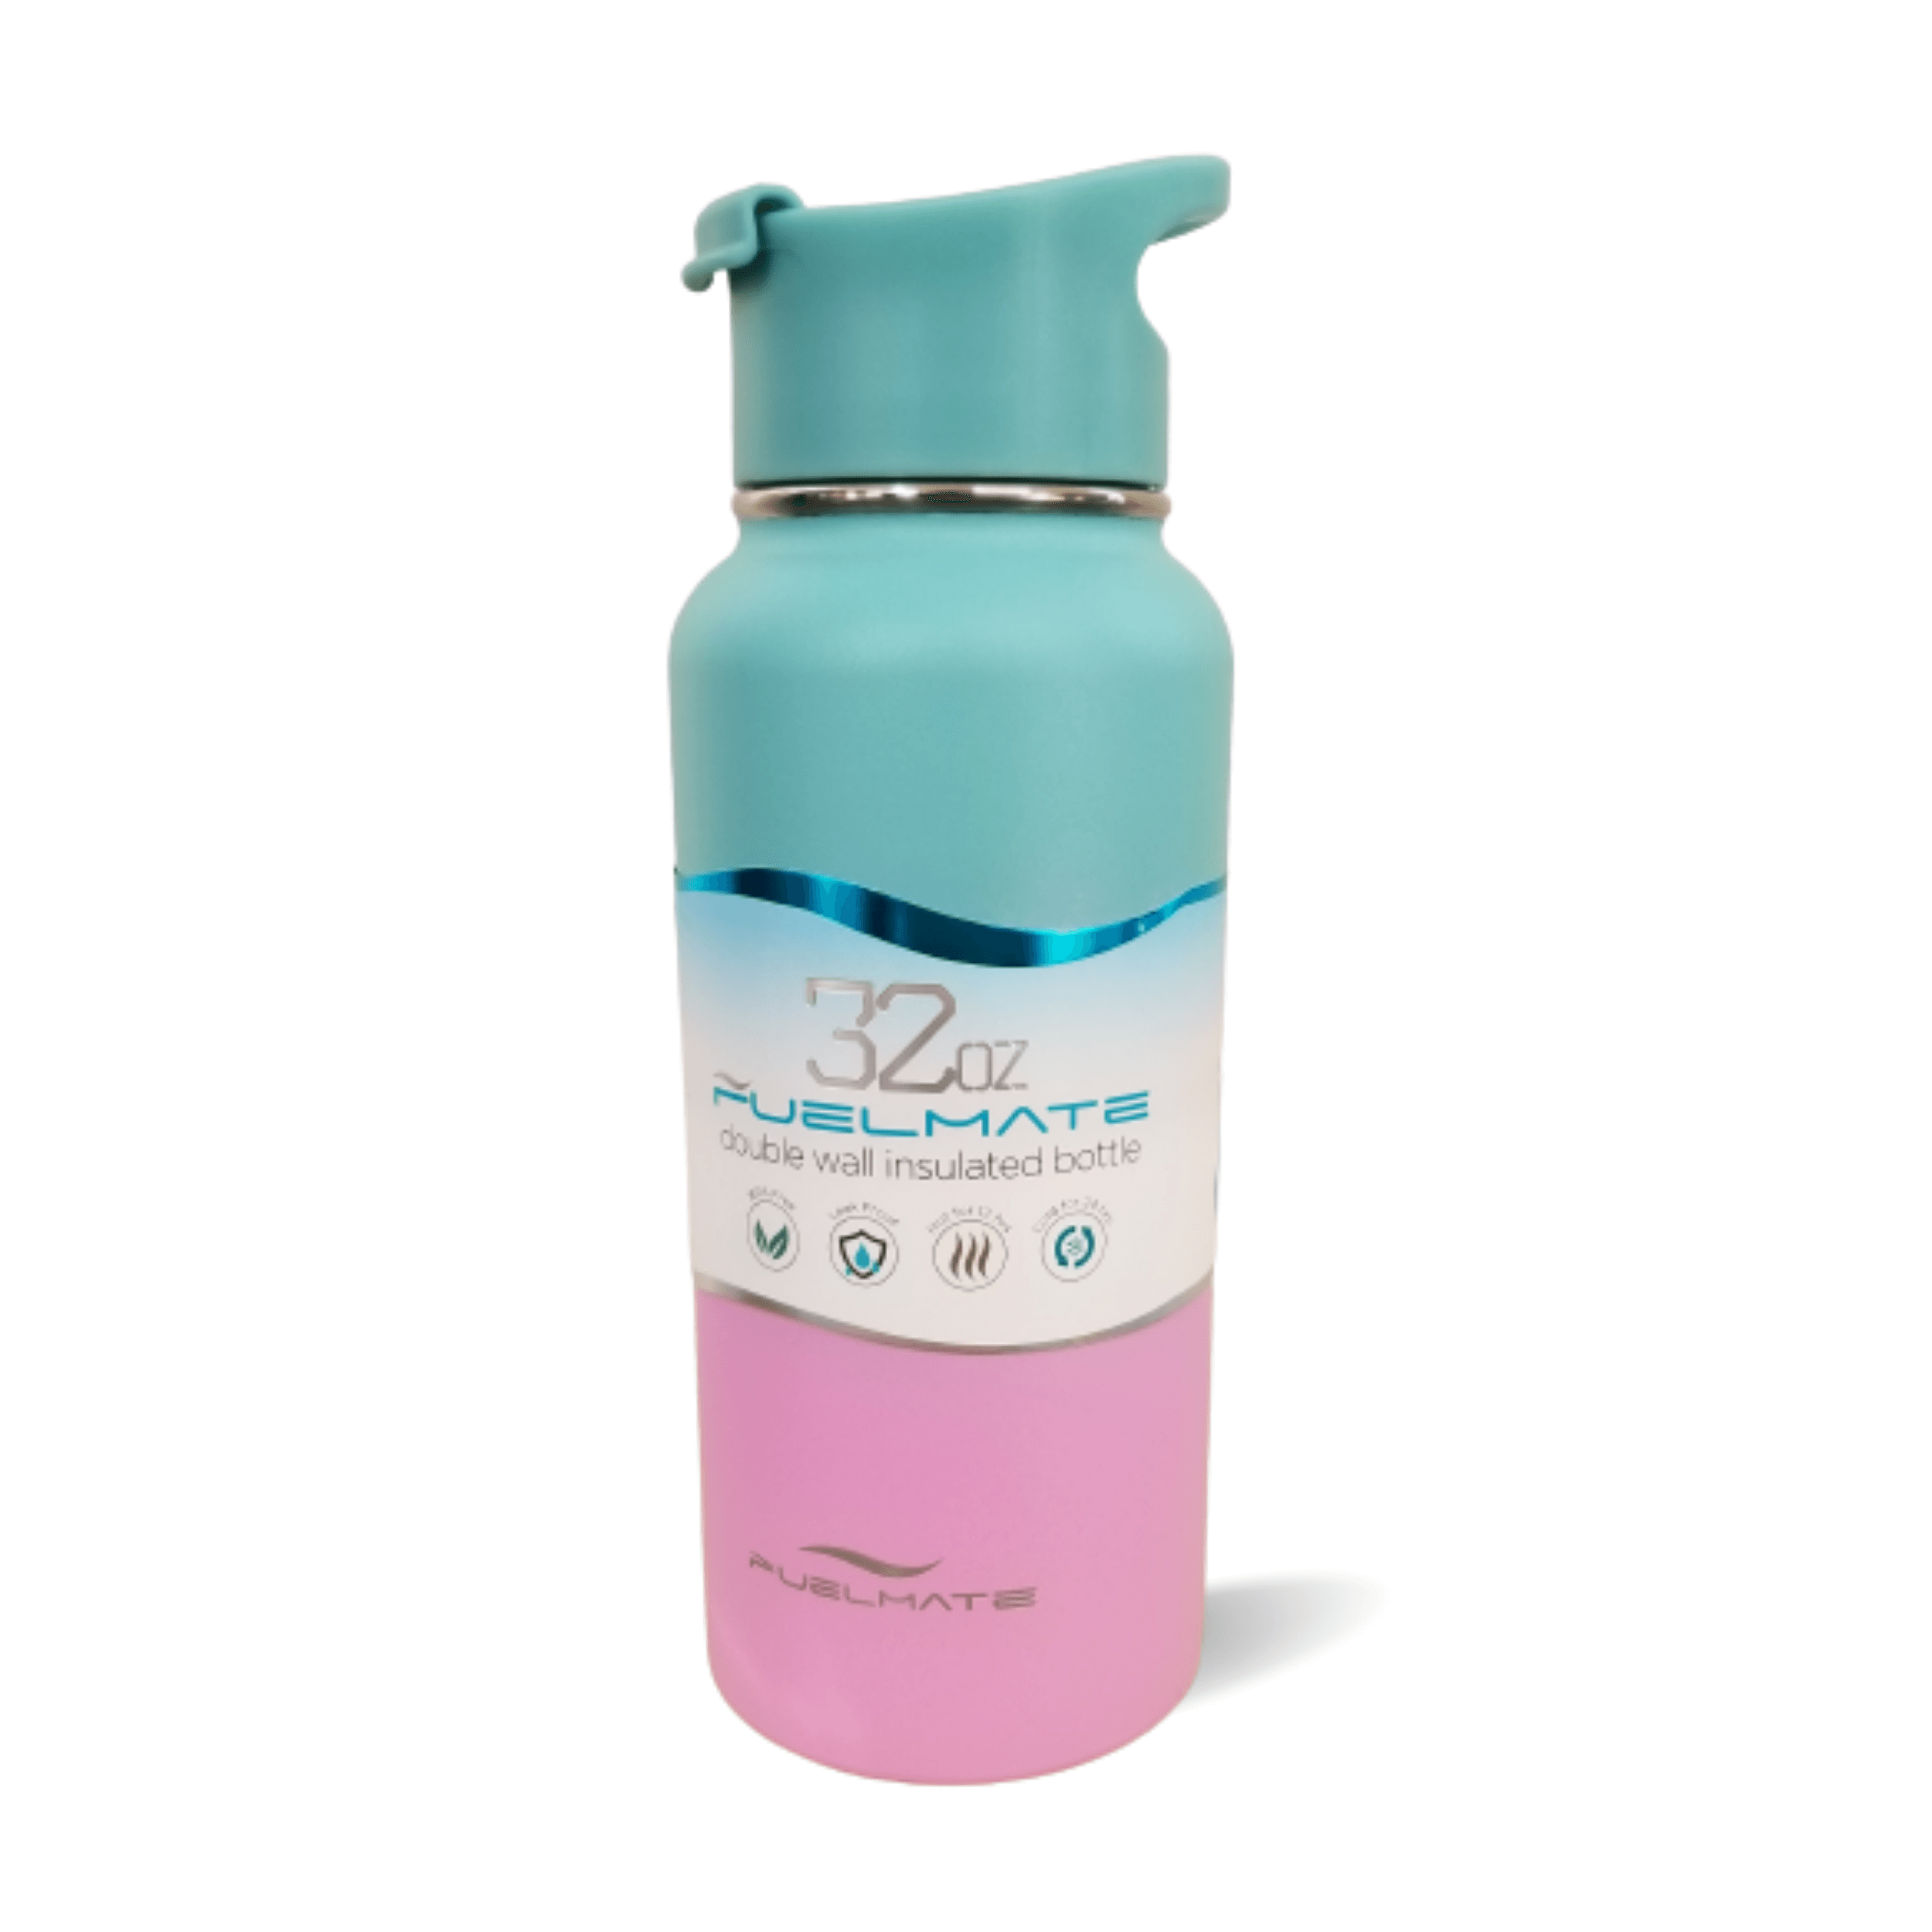 https://watertrackers.com/wp-content/uploads/2021/11/32oz-Fuelmate-water-bottle-mint-pink-ombre.png